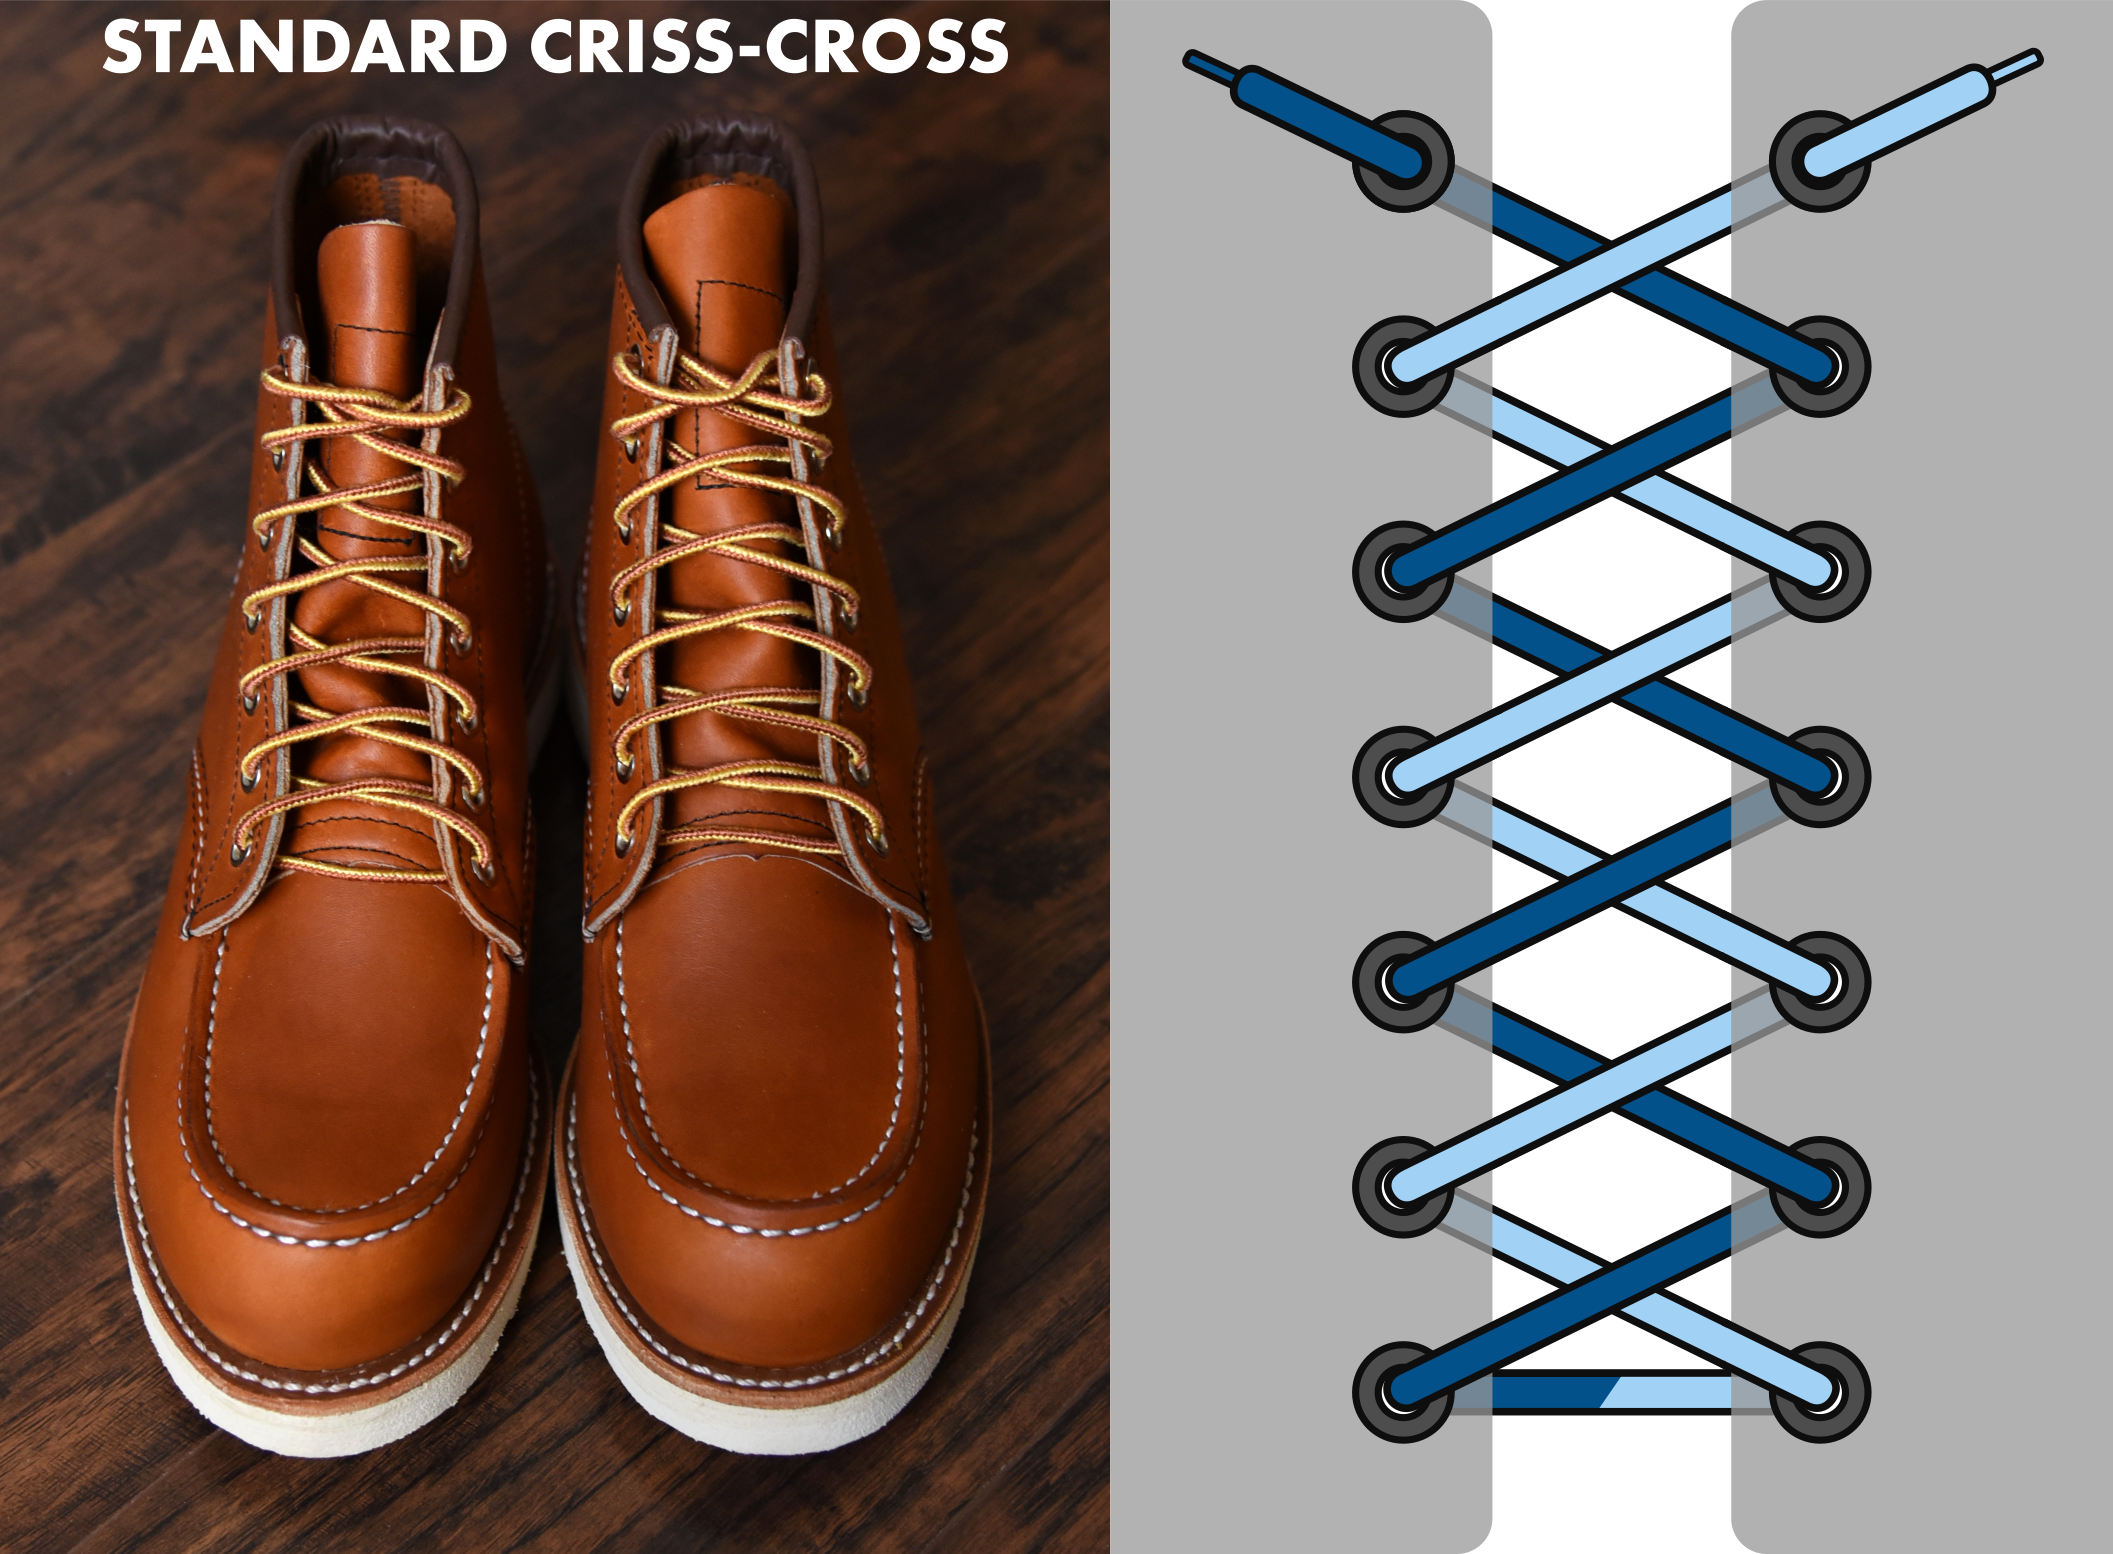 Standard criss cross lacing diagram for boots